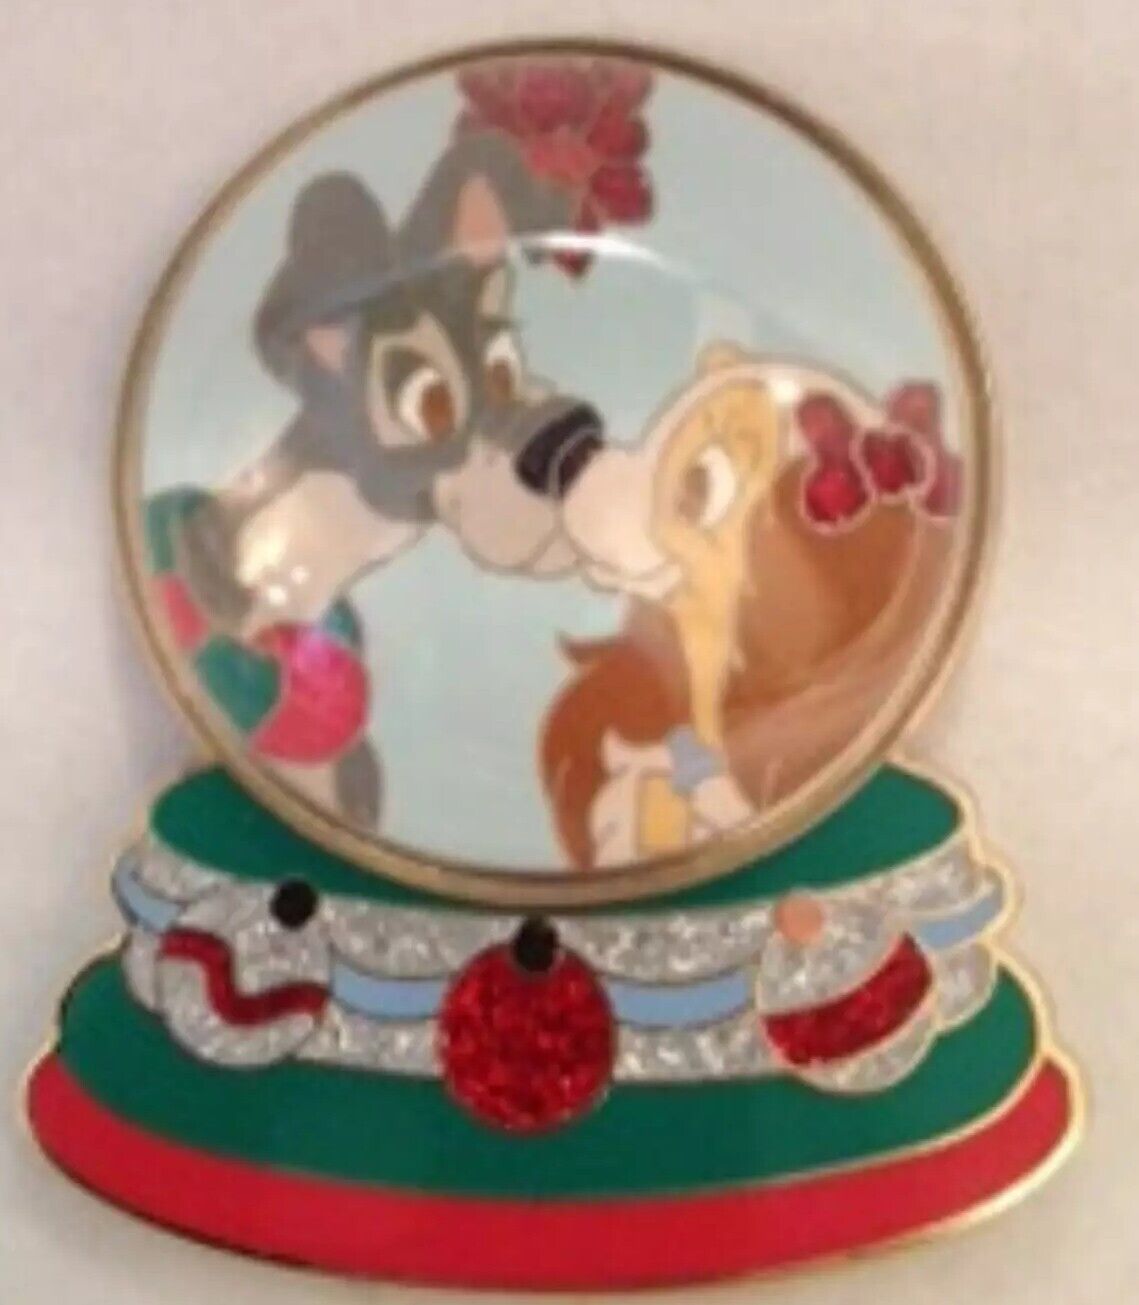 Lady and the Tramp Snowglobe Christmas 2012 LE 300 Disney Pin 93581